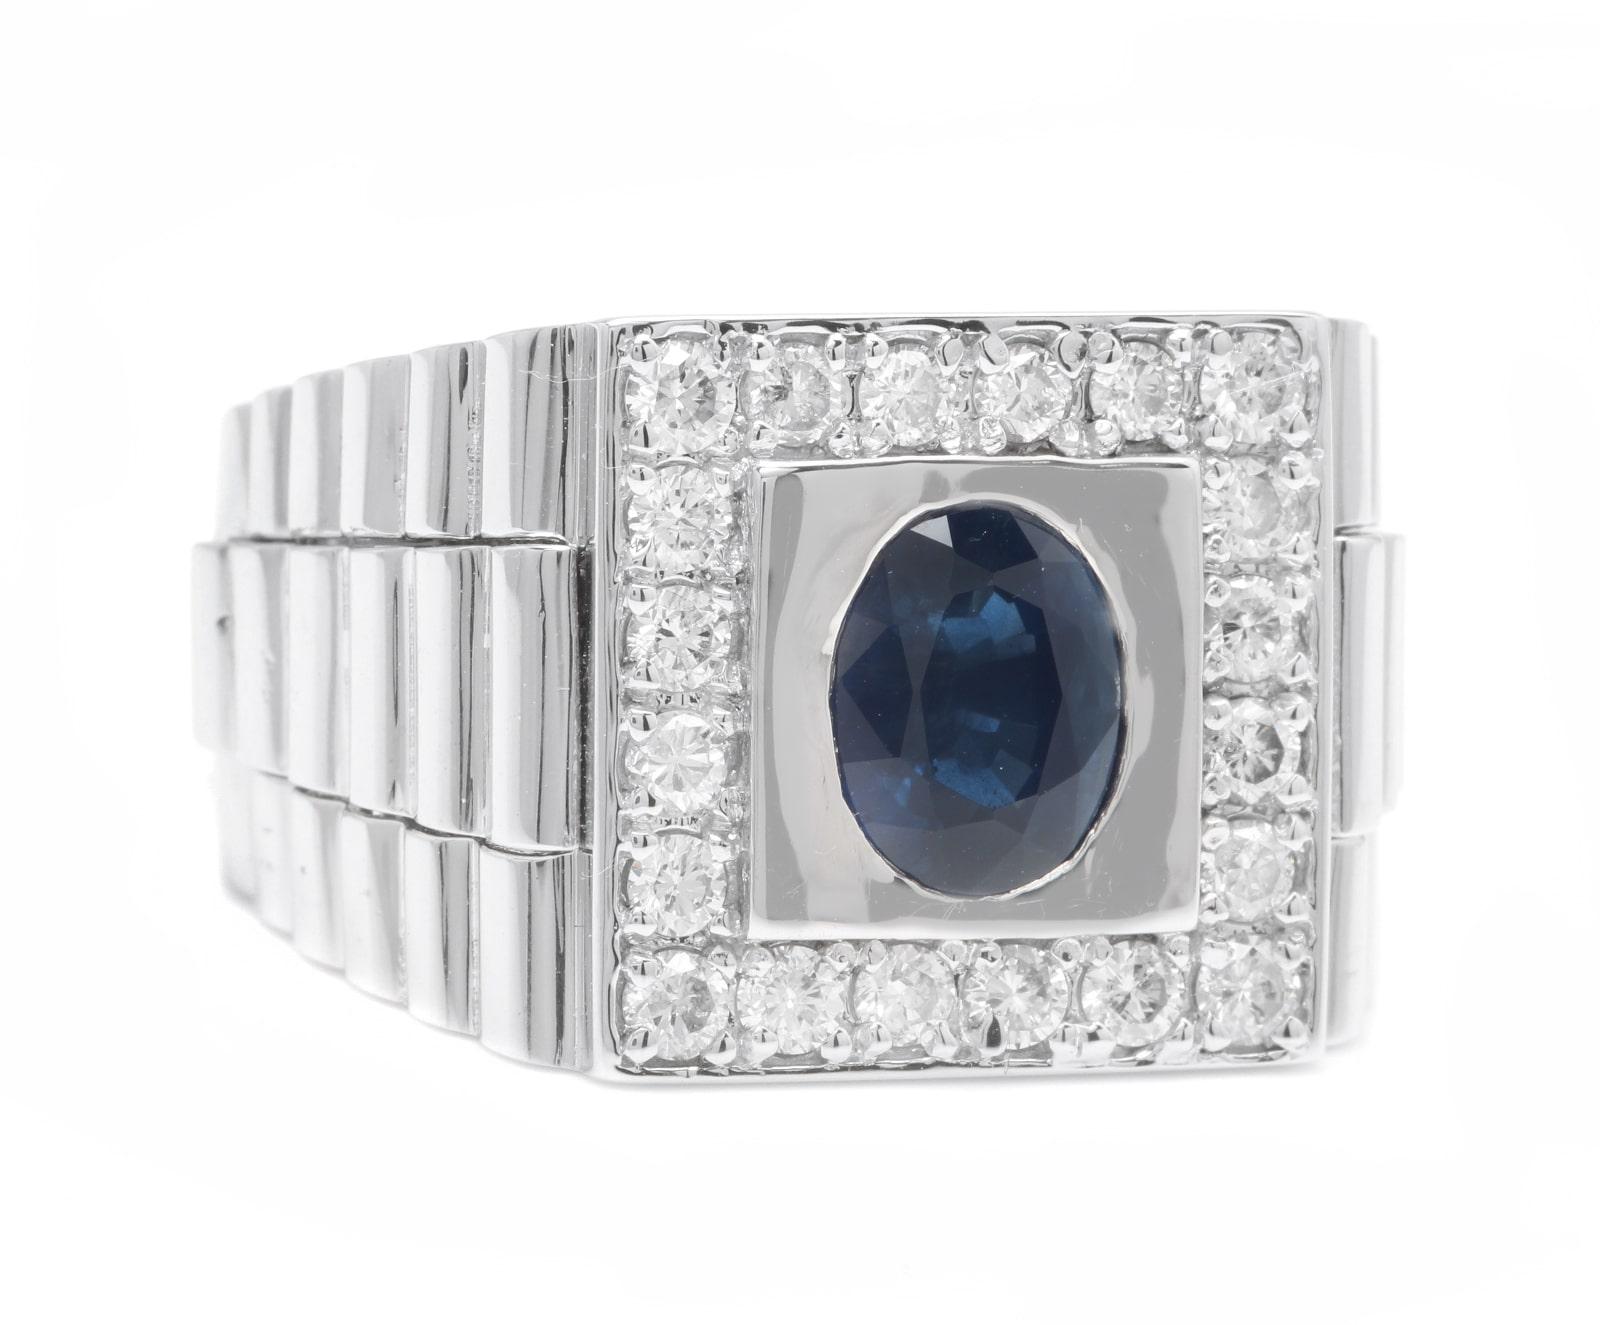 2.80 Carats Natural Diamond & Blue Sapphire 14K Solid White Gold Men's Ring

Amazing looking piece! 

Suggested Replacement Value $7,000.00

Total Natural Round Cut Diamonds Weight: Approx. 0.80 Carats (color G-H / Clarity SI1-SI2)

Total Natural